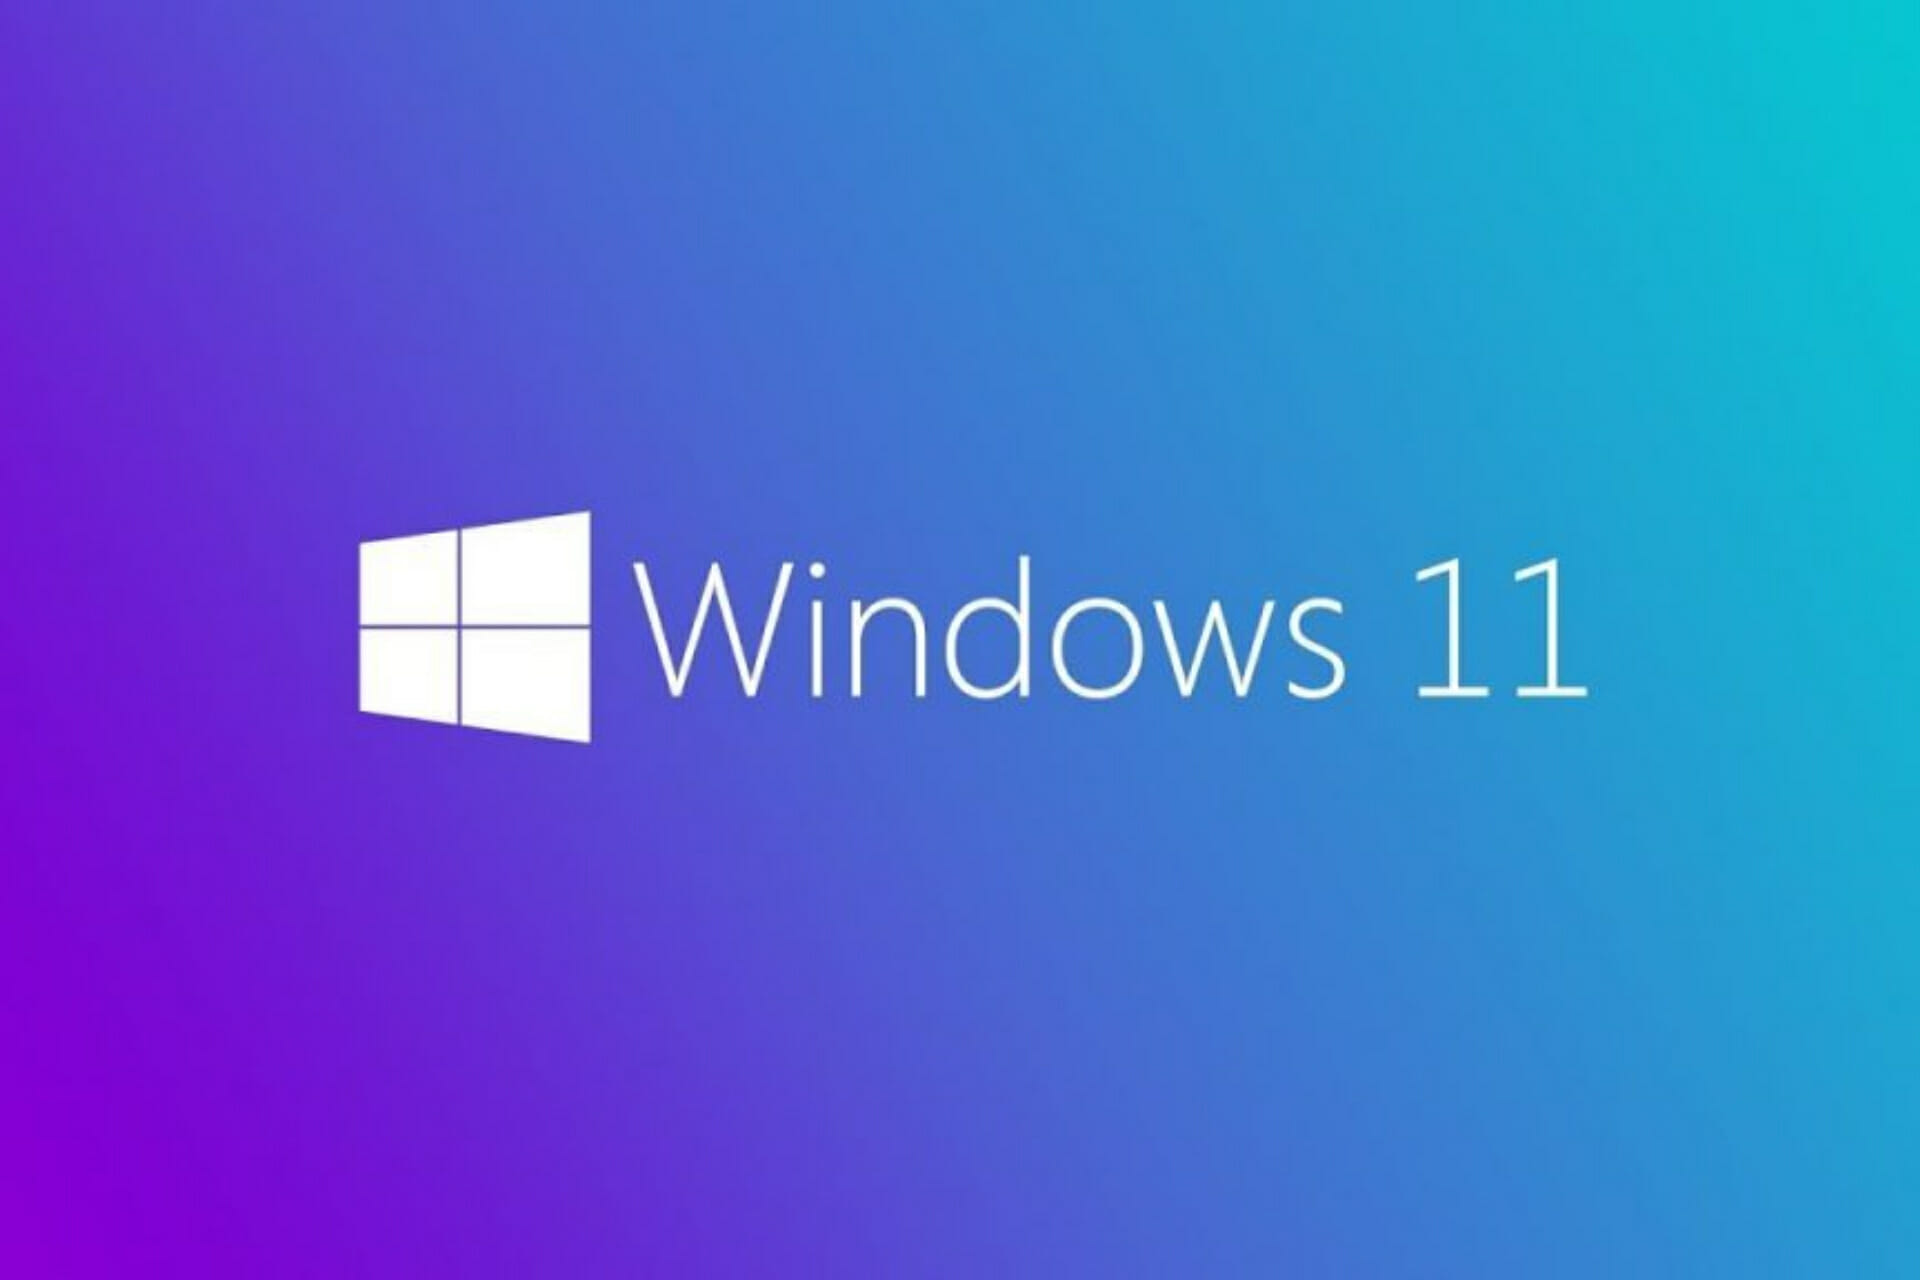 windows 11 rollout october 5th